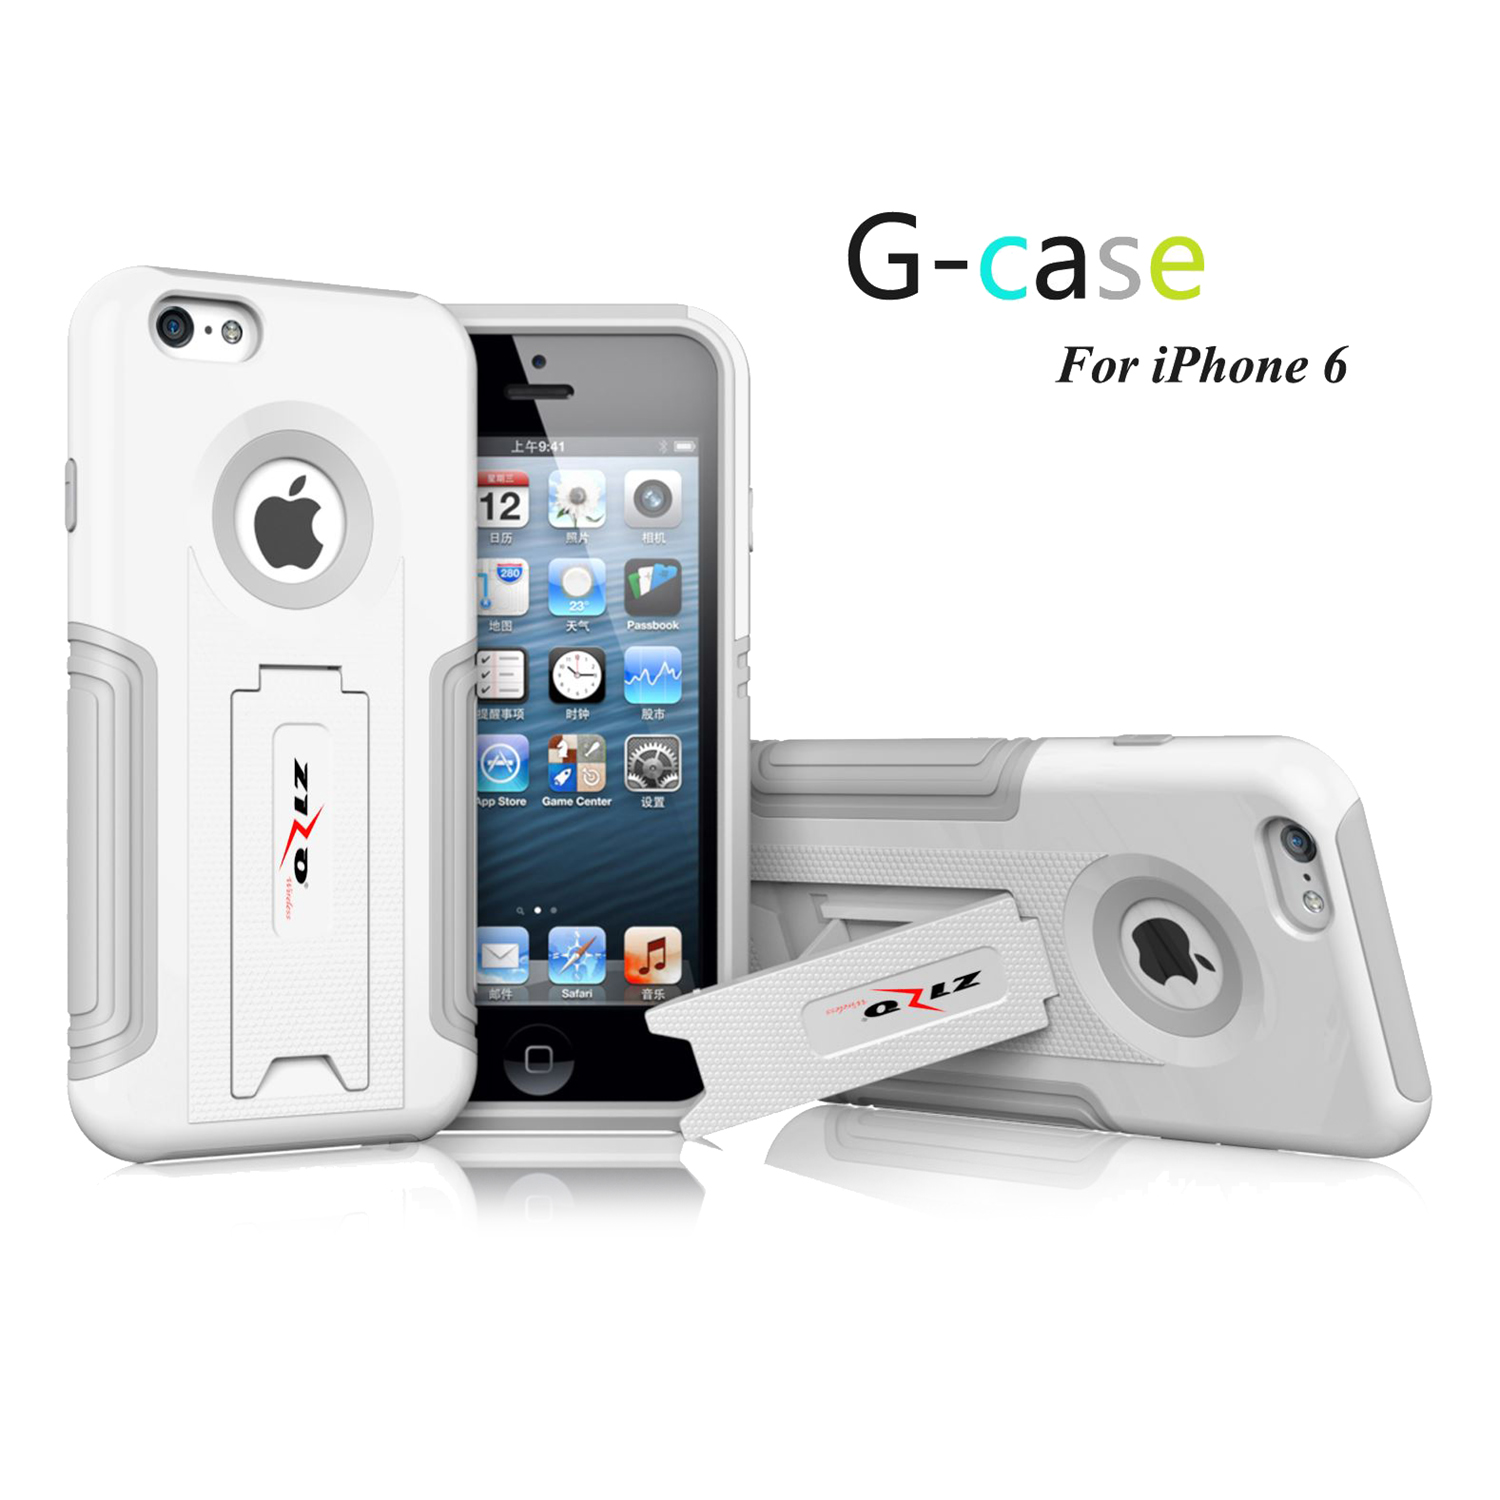 For iPhone 6 - GCASE PC + Gray TPU Combo Cover w/ Kickstand - White HYB